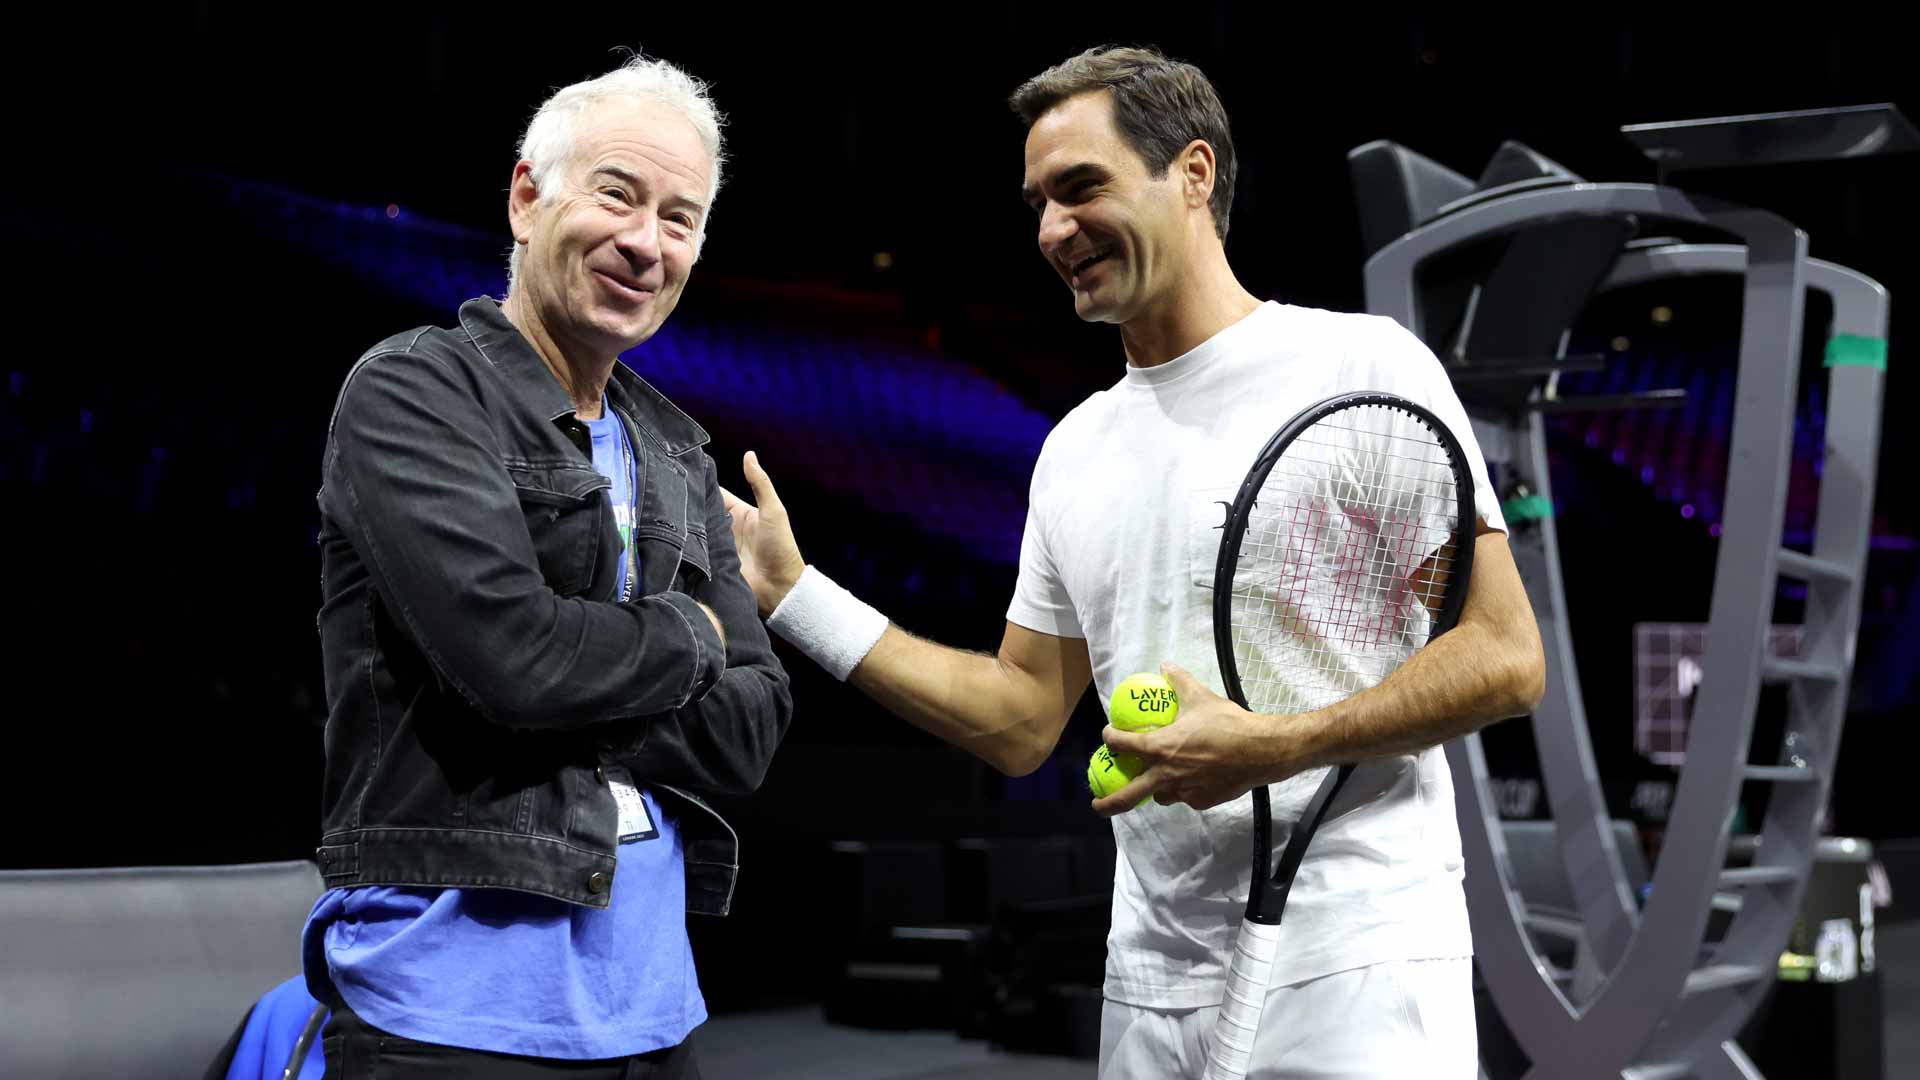 Roger Federer Laughs With John McEnroe, Trains With Stefanos Tsitsipas At Laver Cup ATP Tour Tennis